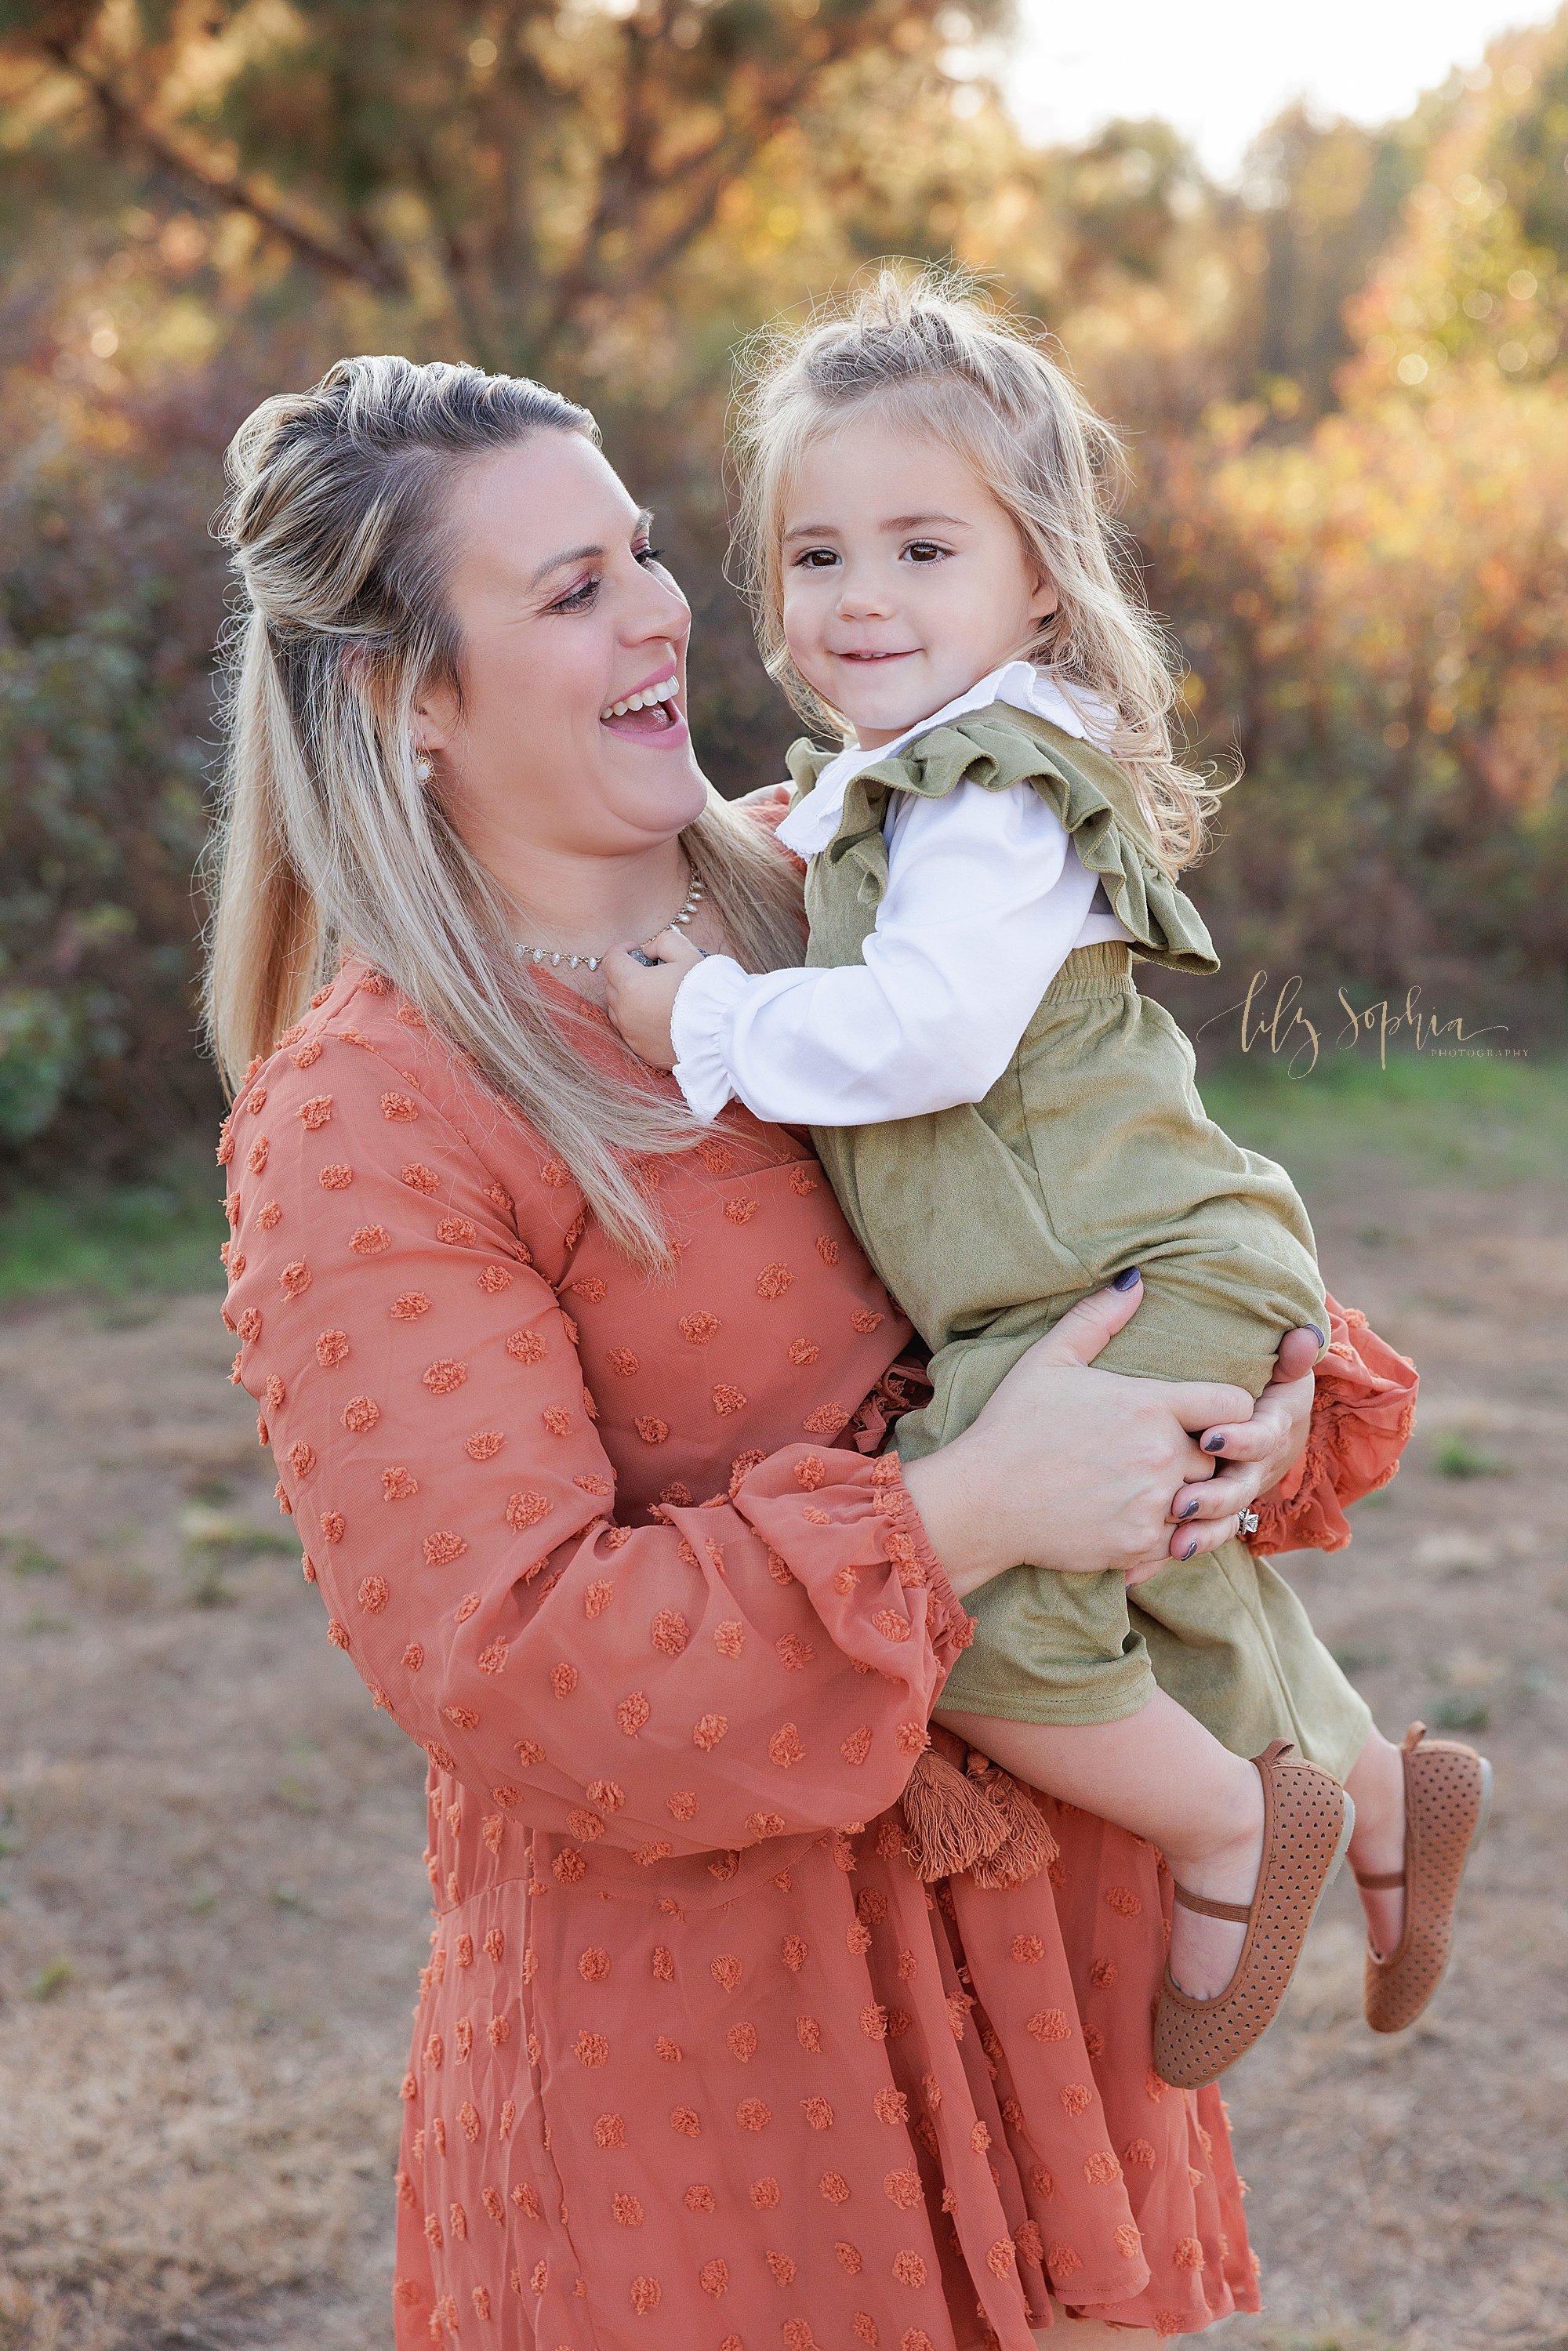  Family photo session in a field near Atlanta with a mother holding her young daughter as she plays with her mother’s necklace taken during autumn at sunset. 